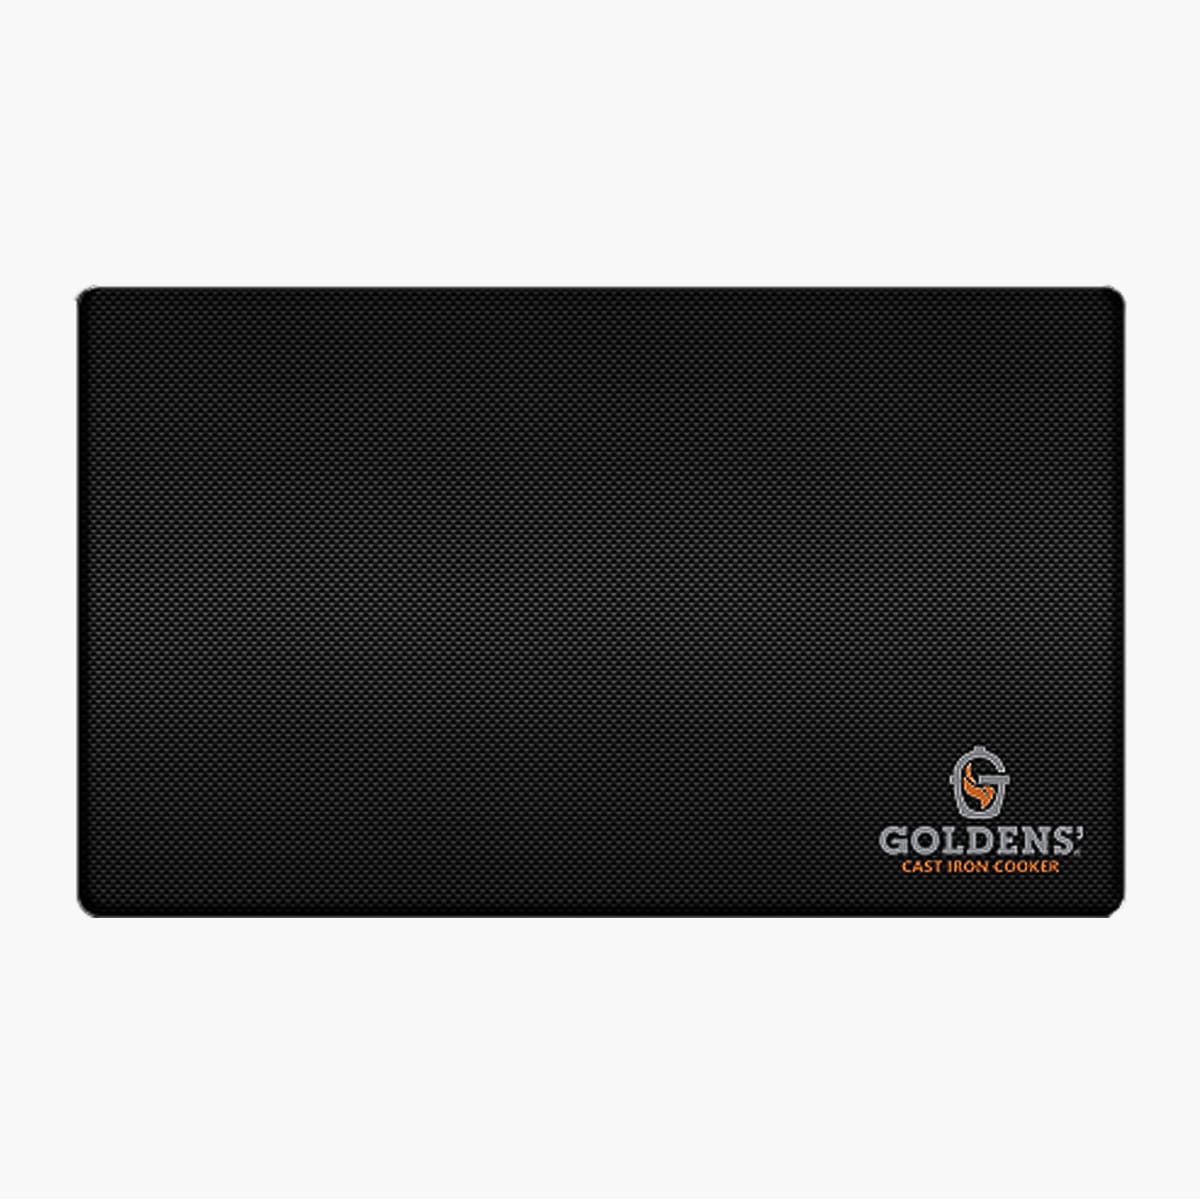 Goldens' Cast Iron Cooker Mat for 20.5" and 14" Kamado Grills